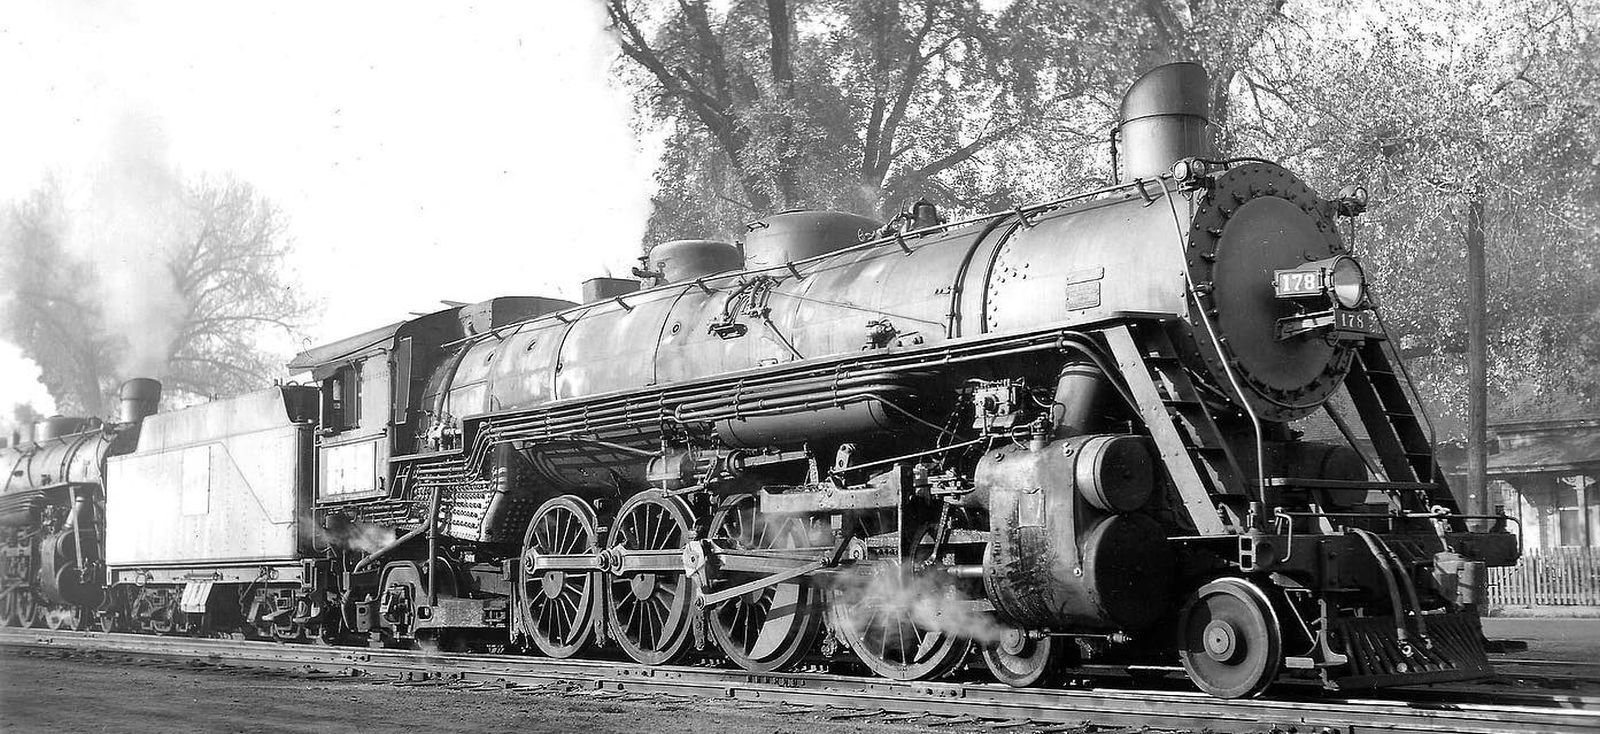 The former No. 412, here as Western Pacific class MTP-44 No. 178